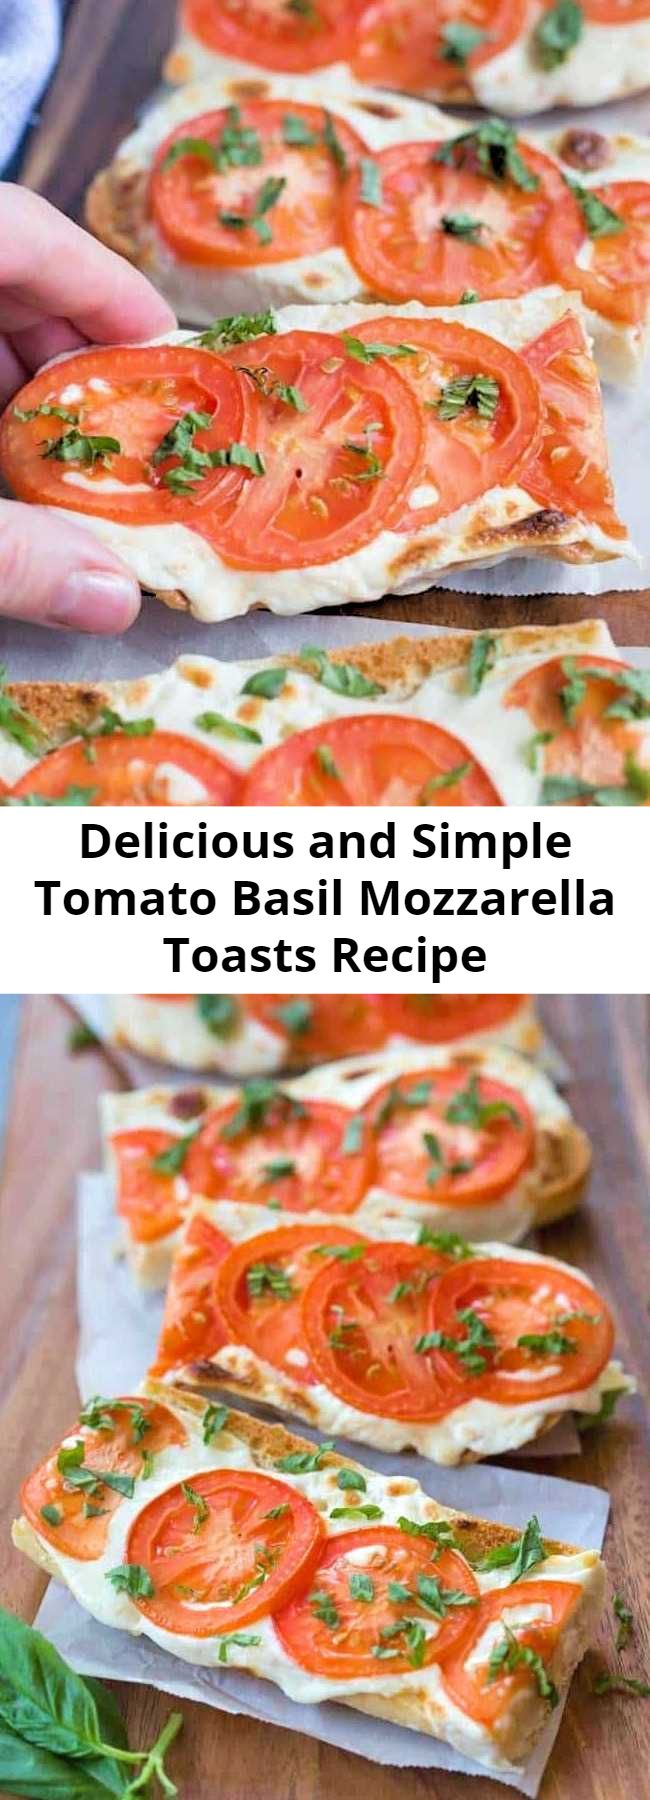 Delicious and Simple Tomato Basil Mozzarella Toasts Recipe - Everyone always LOVES these delicious and simple toasts. Serve them as a side dish or appetizer. A crusty baguette toasted with fresh mozzarella and tomato and garnished with basil. #tomato #basil #mozzarella #toast #easy #best